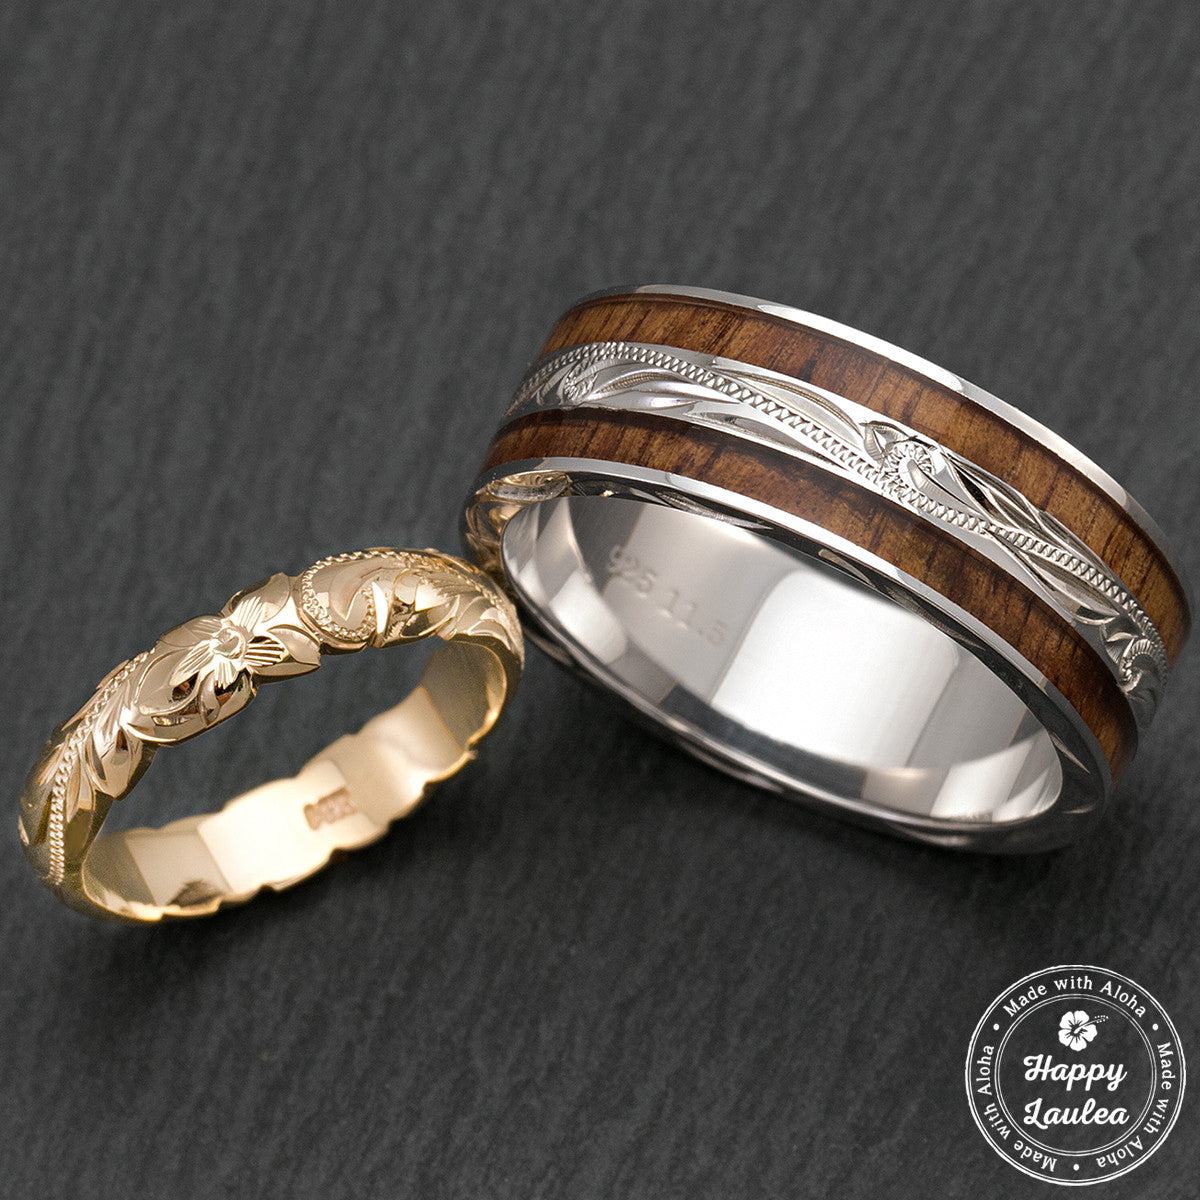 Pair of Hand Engraved 14K Gold And Sterling Silver Ring Set with Hawaiian Koa Wood Inlay - 4&8mm, Standard Fitment